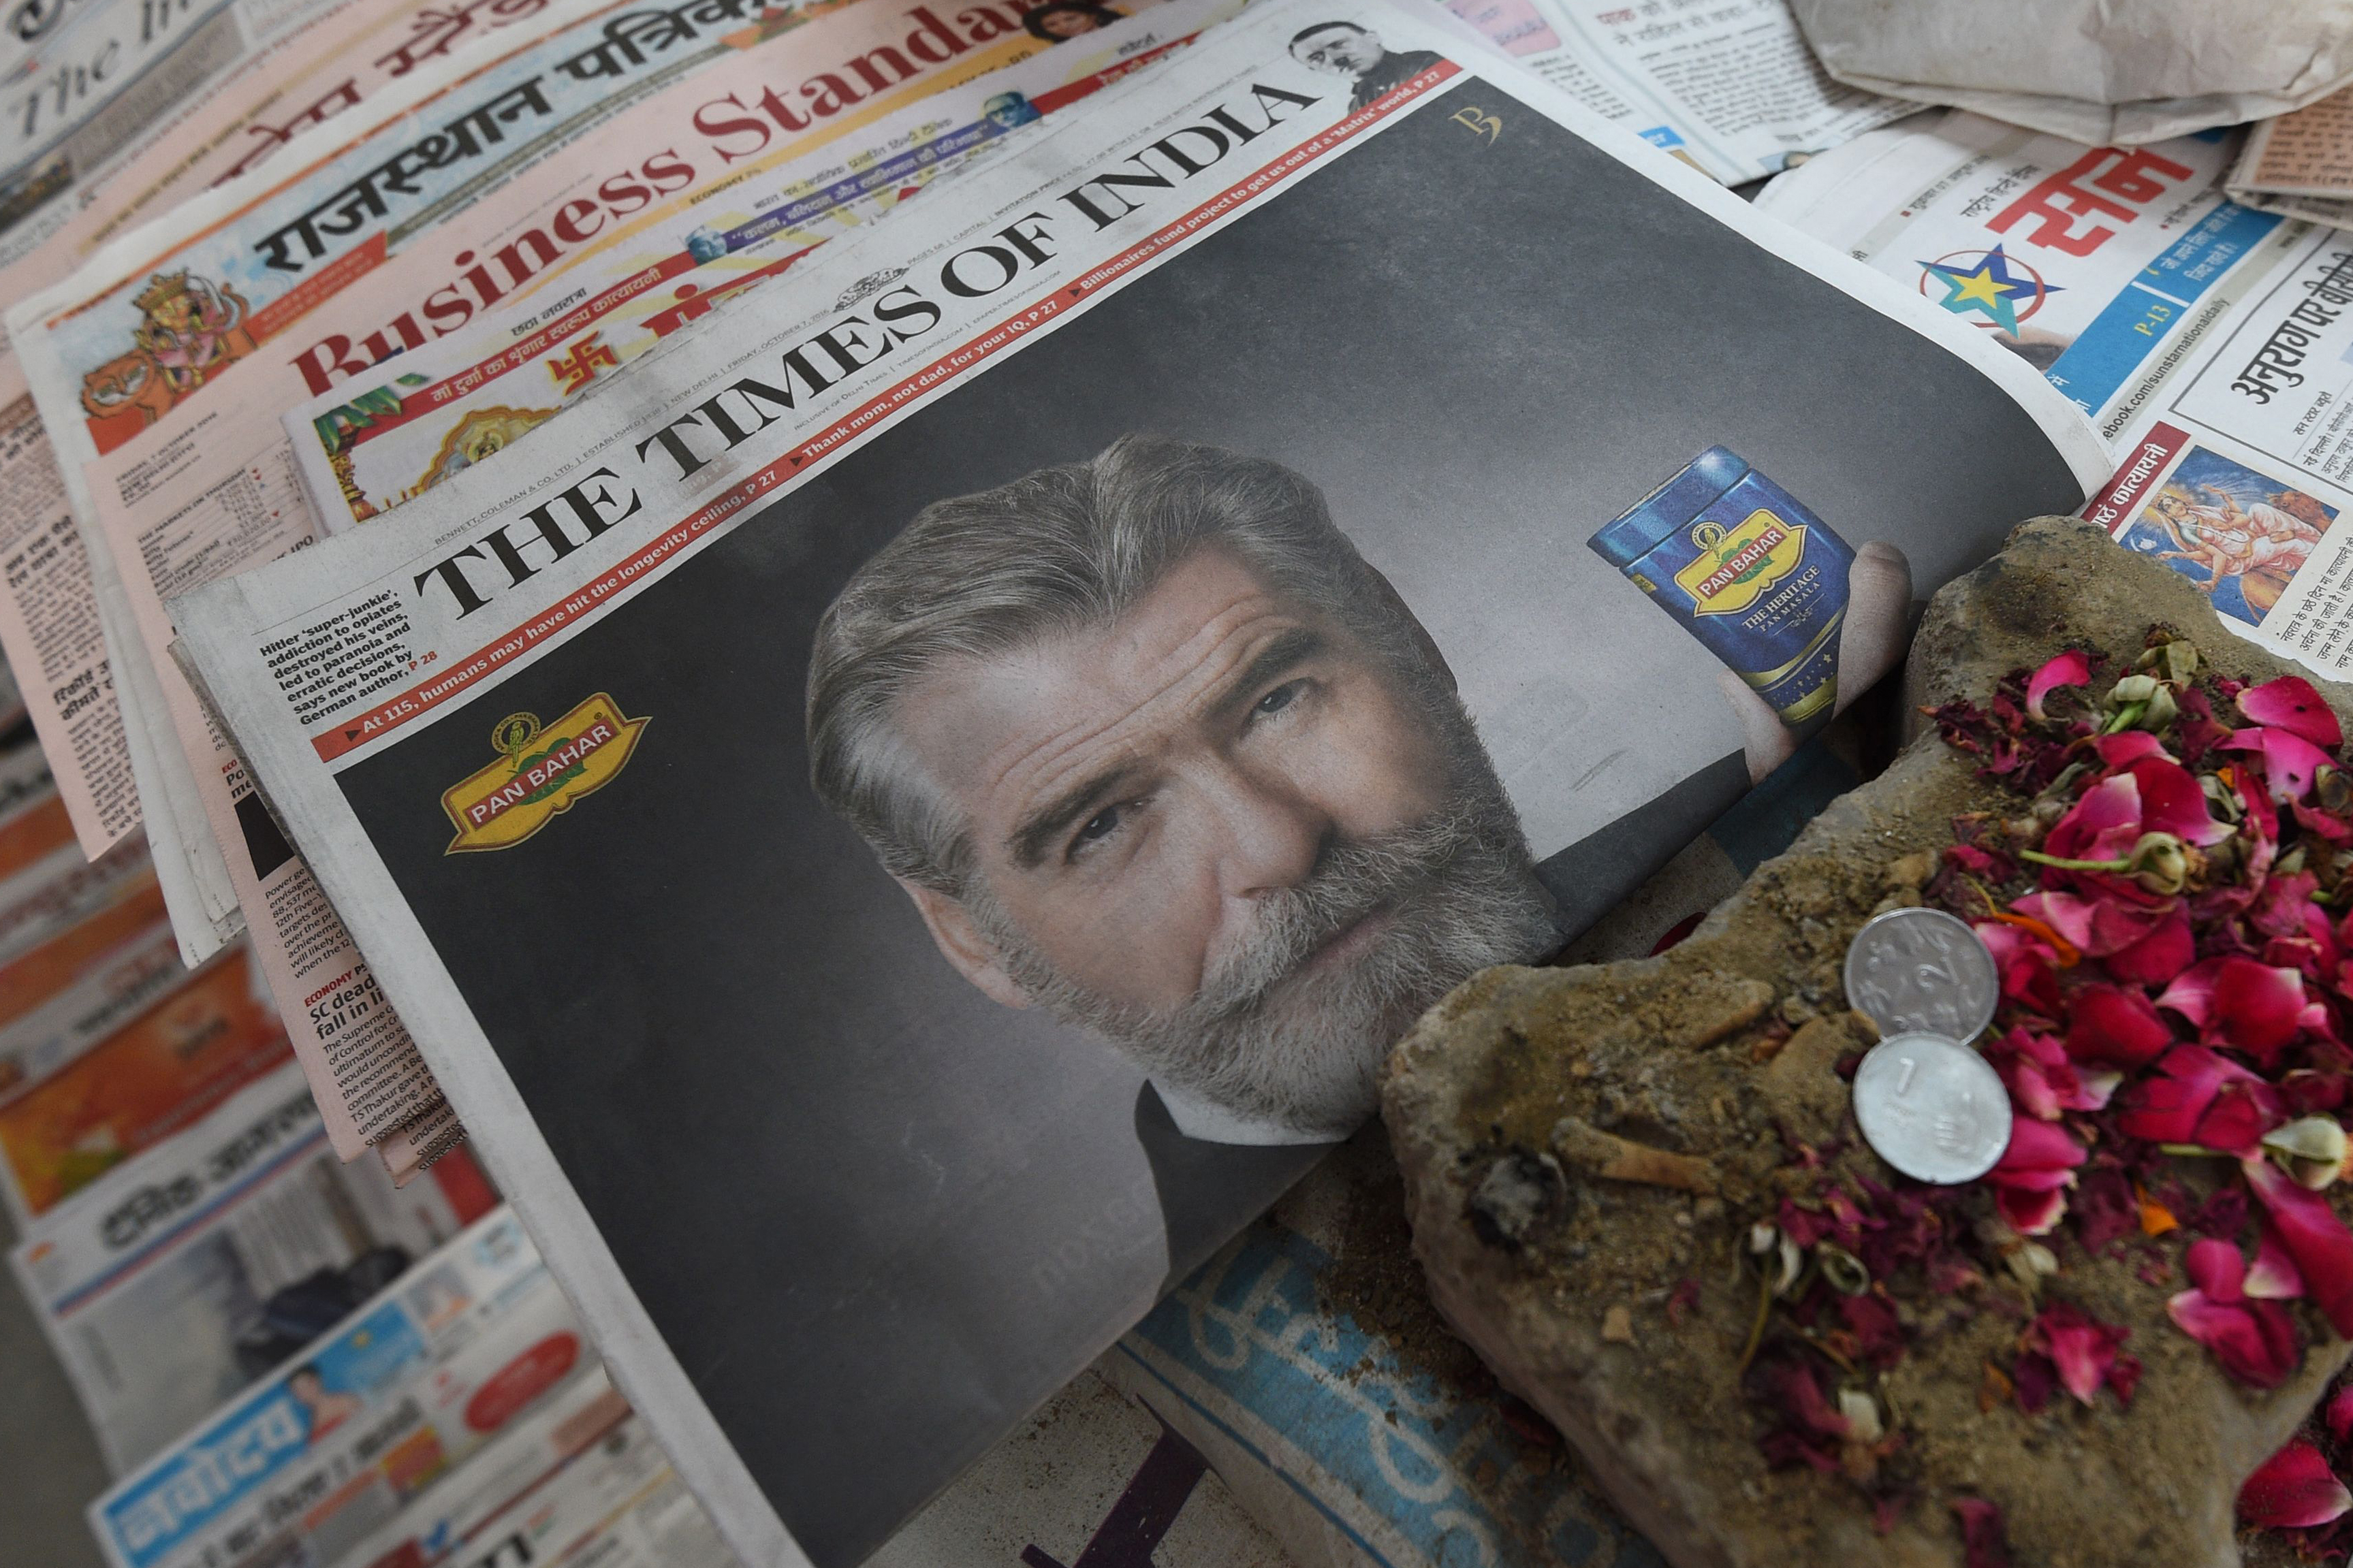 A newspaper with a front page advertisement of Pierce Brosnan endorsing an Indian mouth freshener, is seen on the streets of New Delhi on Oct. 7, 2016. (Dominique Faget—AFP/Getty Images)